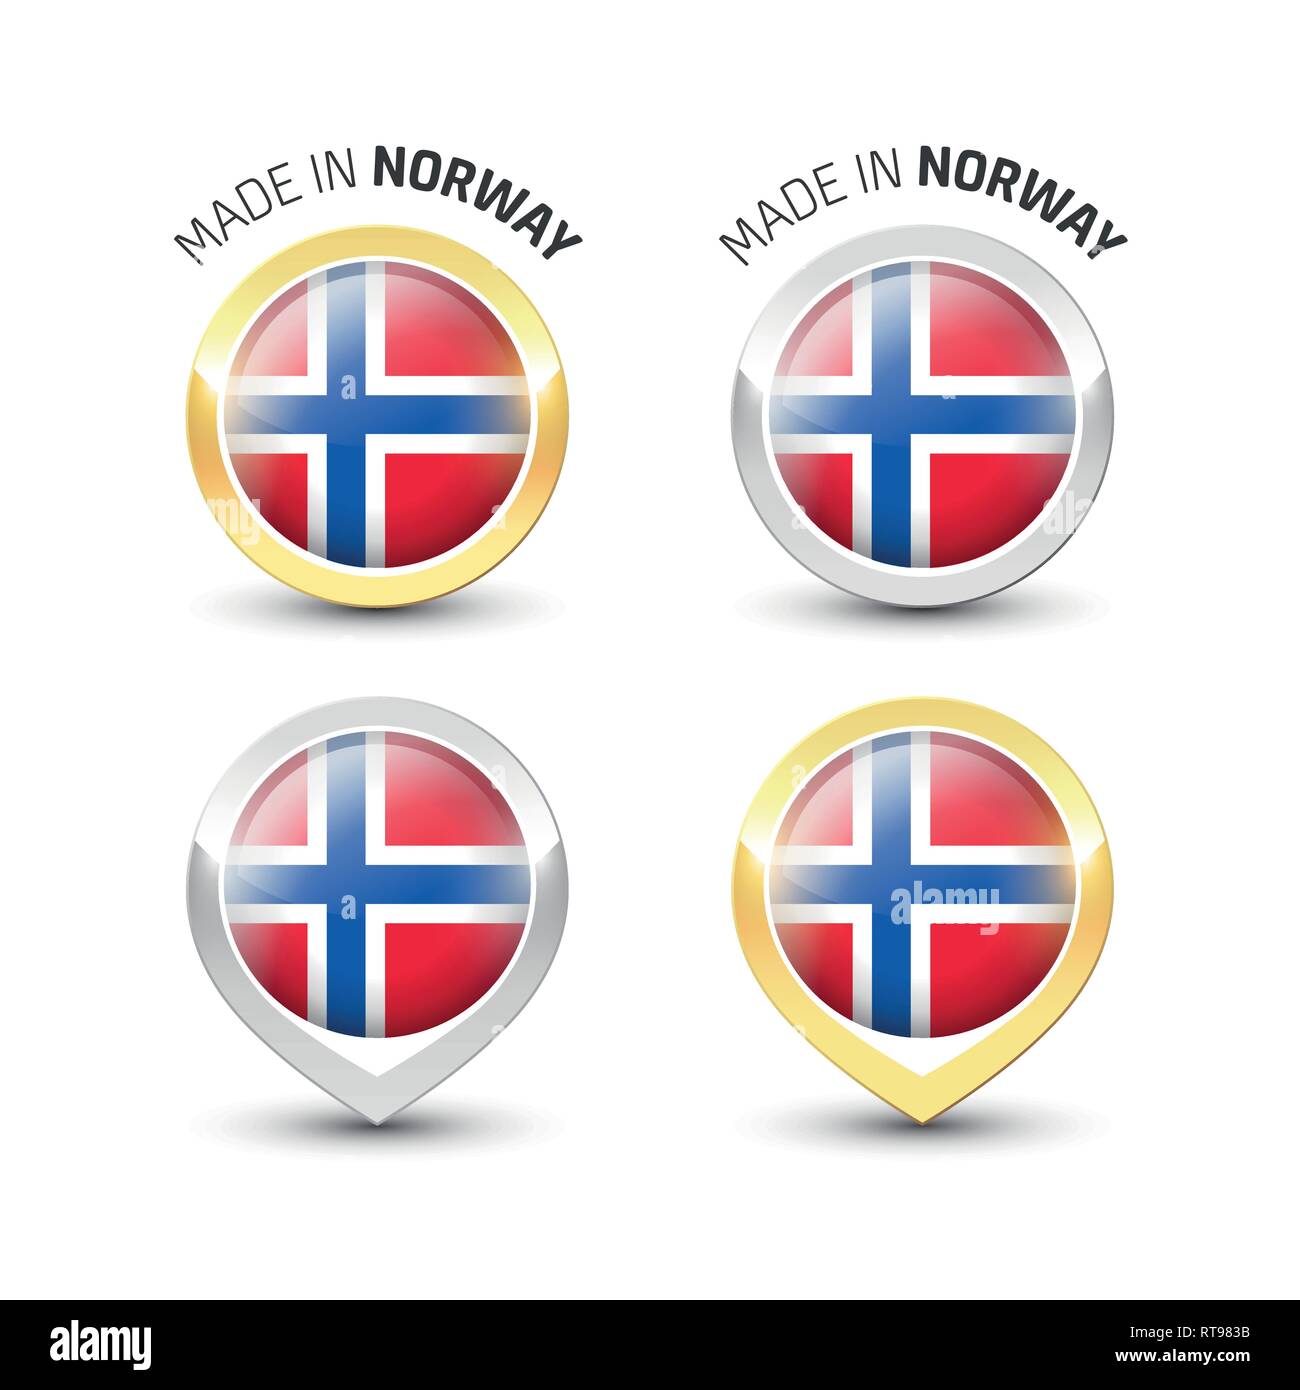 Made in Norway - Guarantee label with the Norwegian flag inside round gold and silver icons. Stock Vector